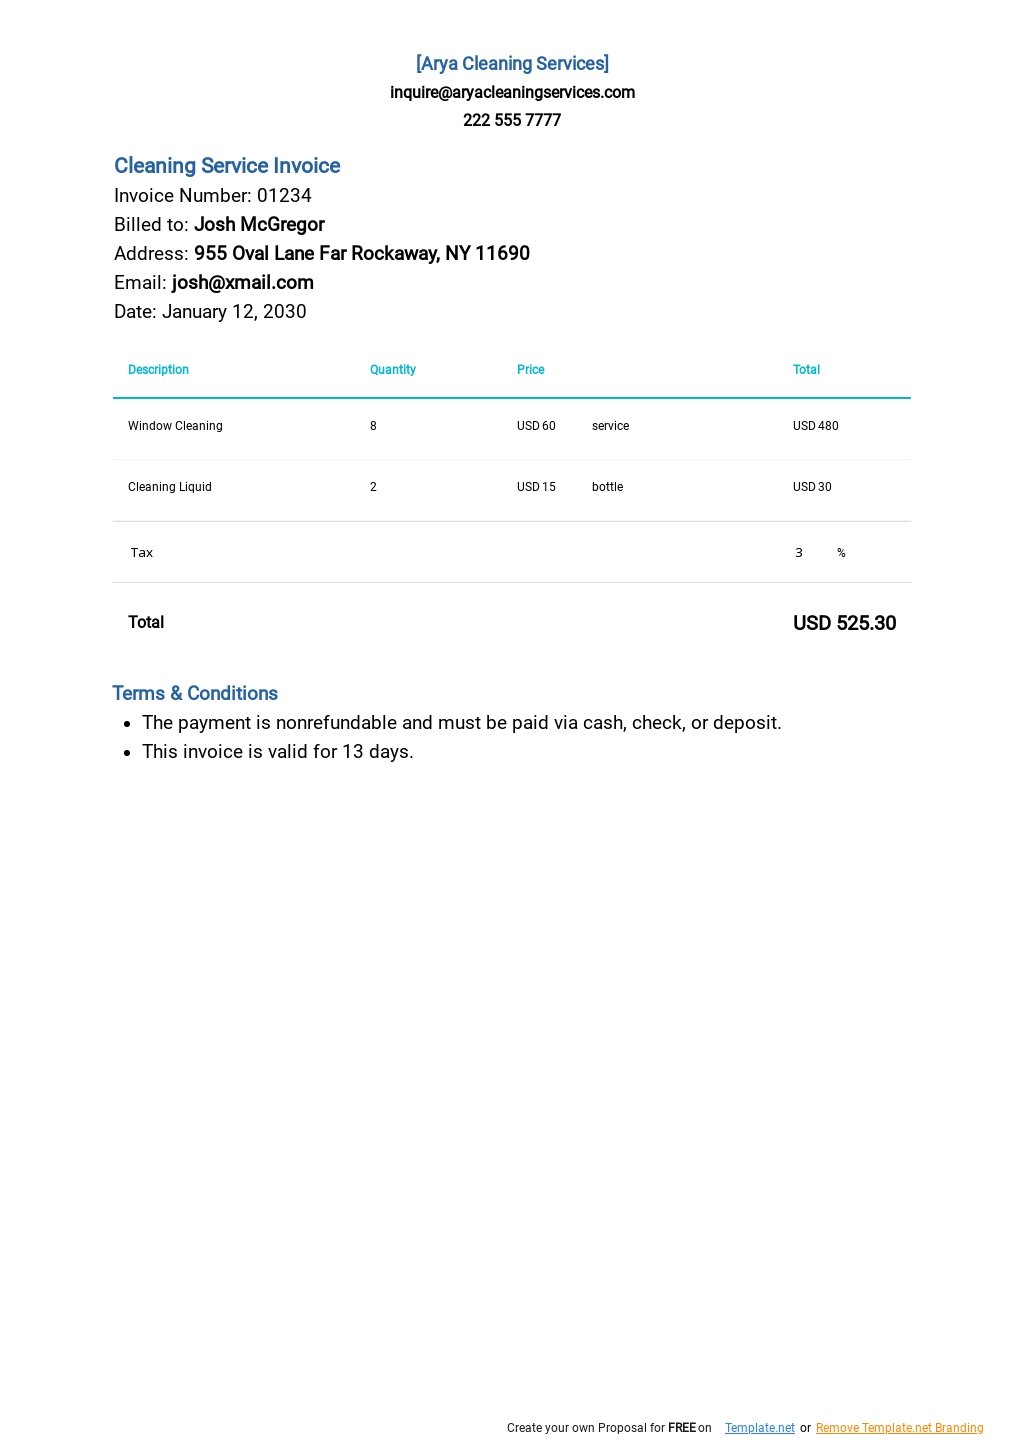 Cleaning Service Invoice Template - Google Docs, Google Sheets Regarding Lawn Maintenance Invoice Template